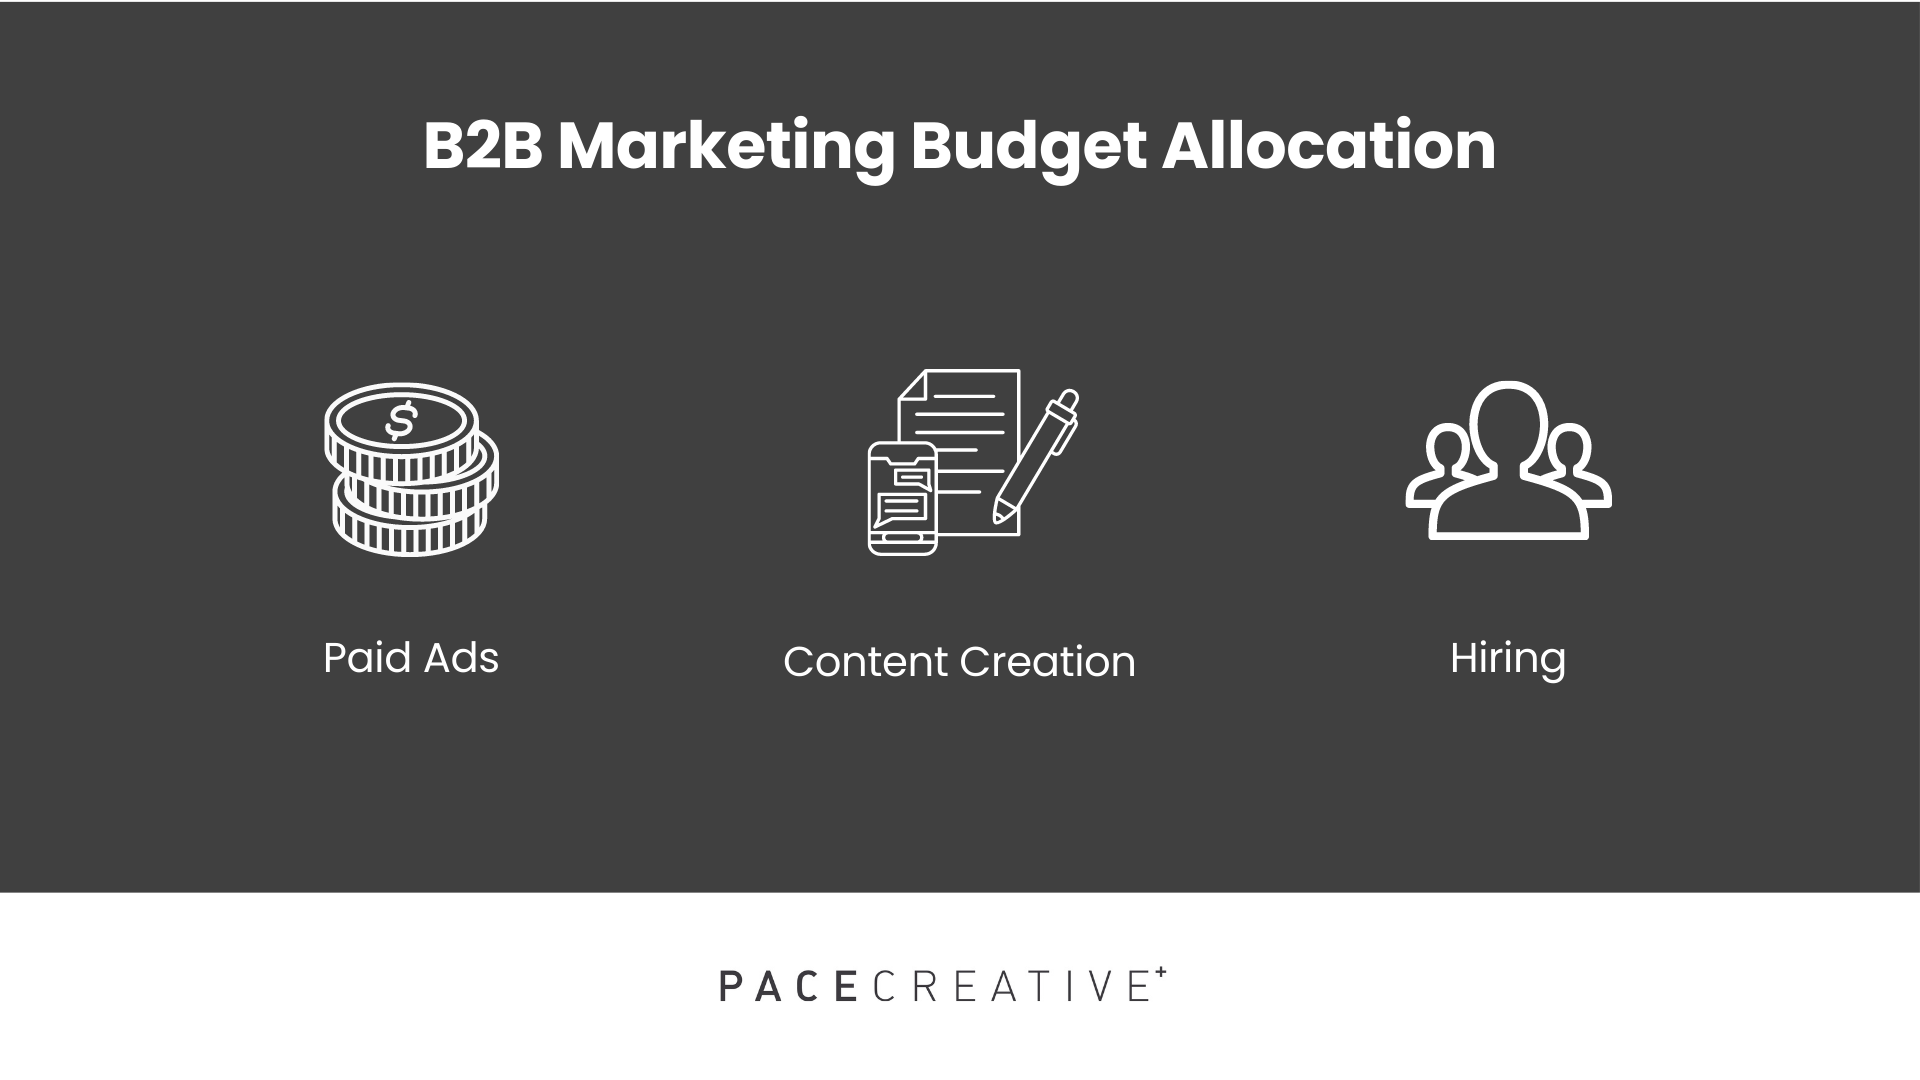 The top 3 areas for B2B marketing budget allocation in 2023.